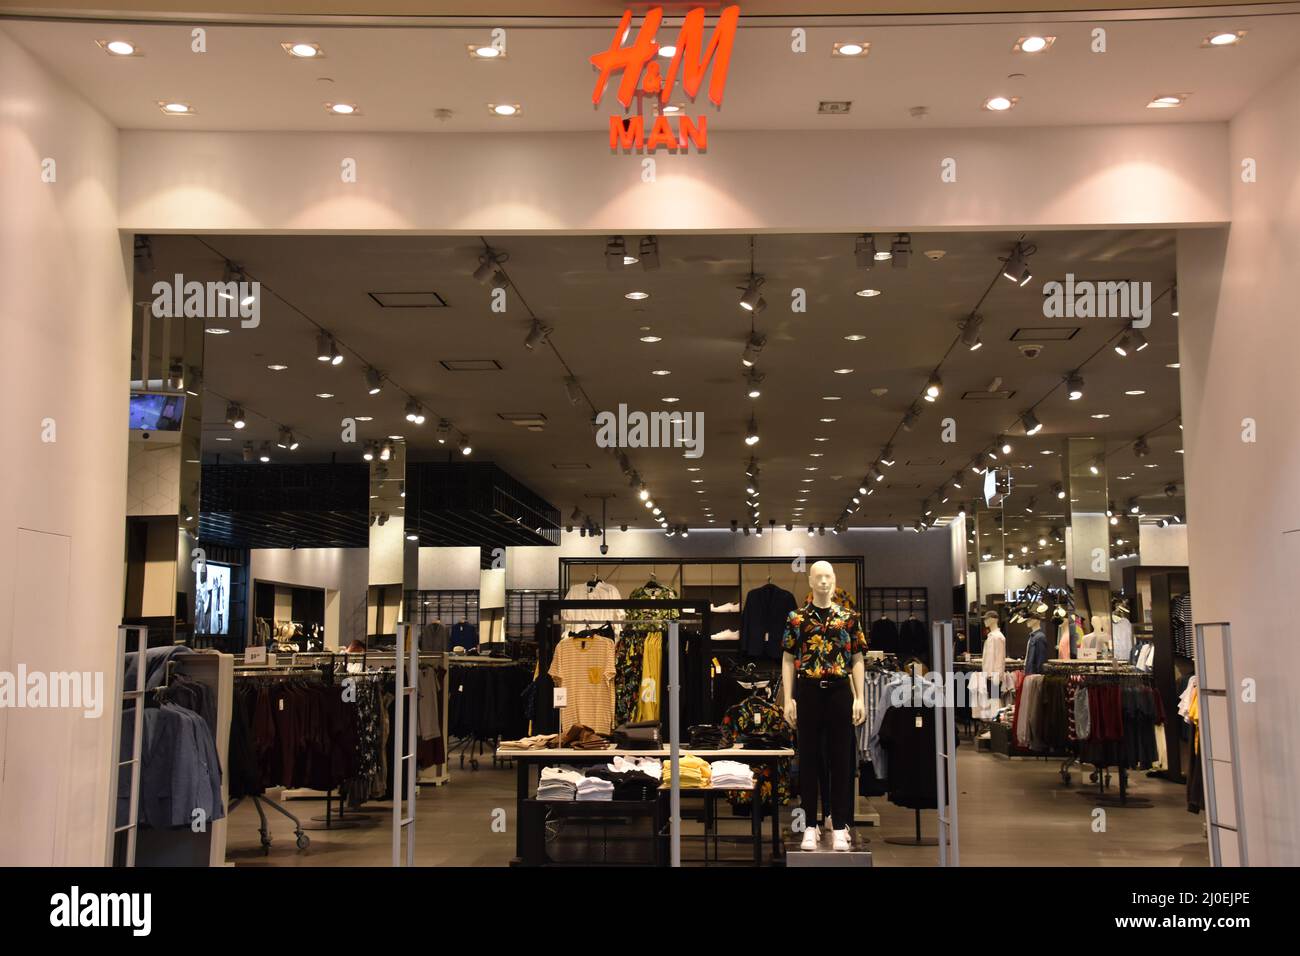 H&M store at The Galleria mall in Houston, Texas Stock Photo